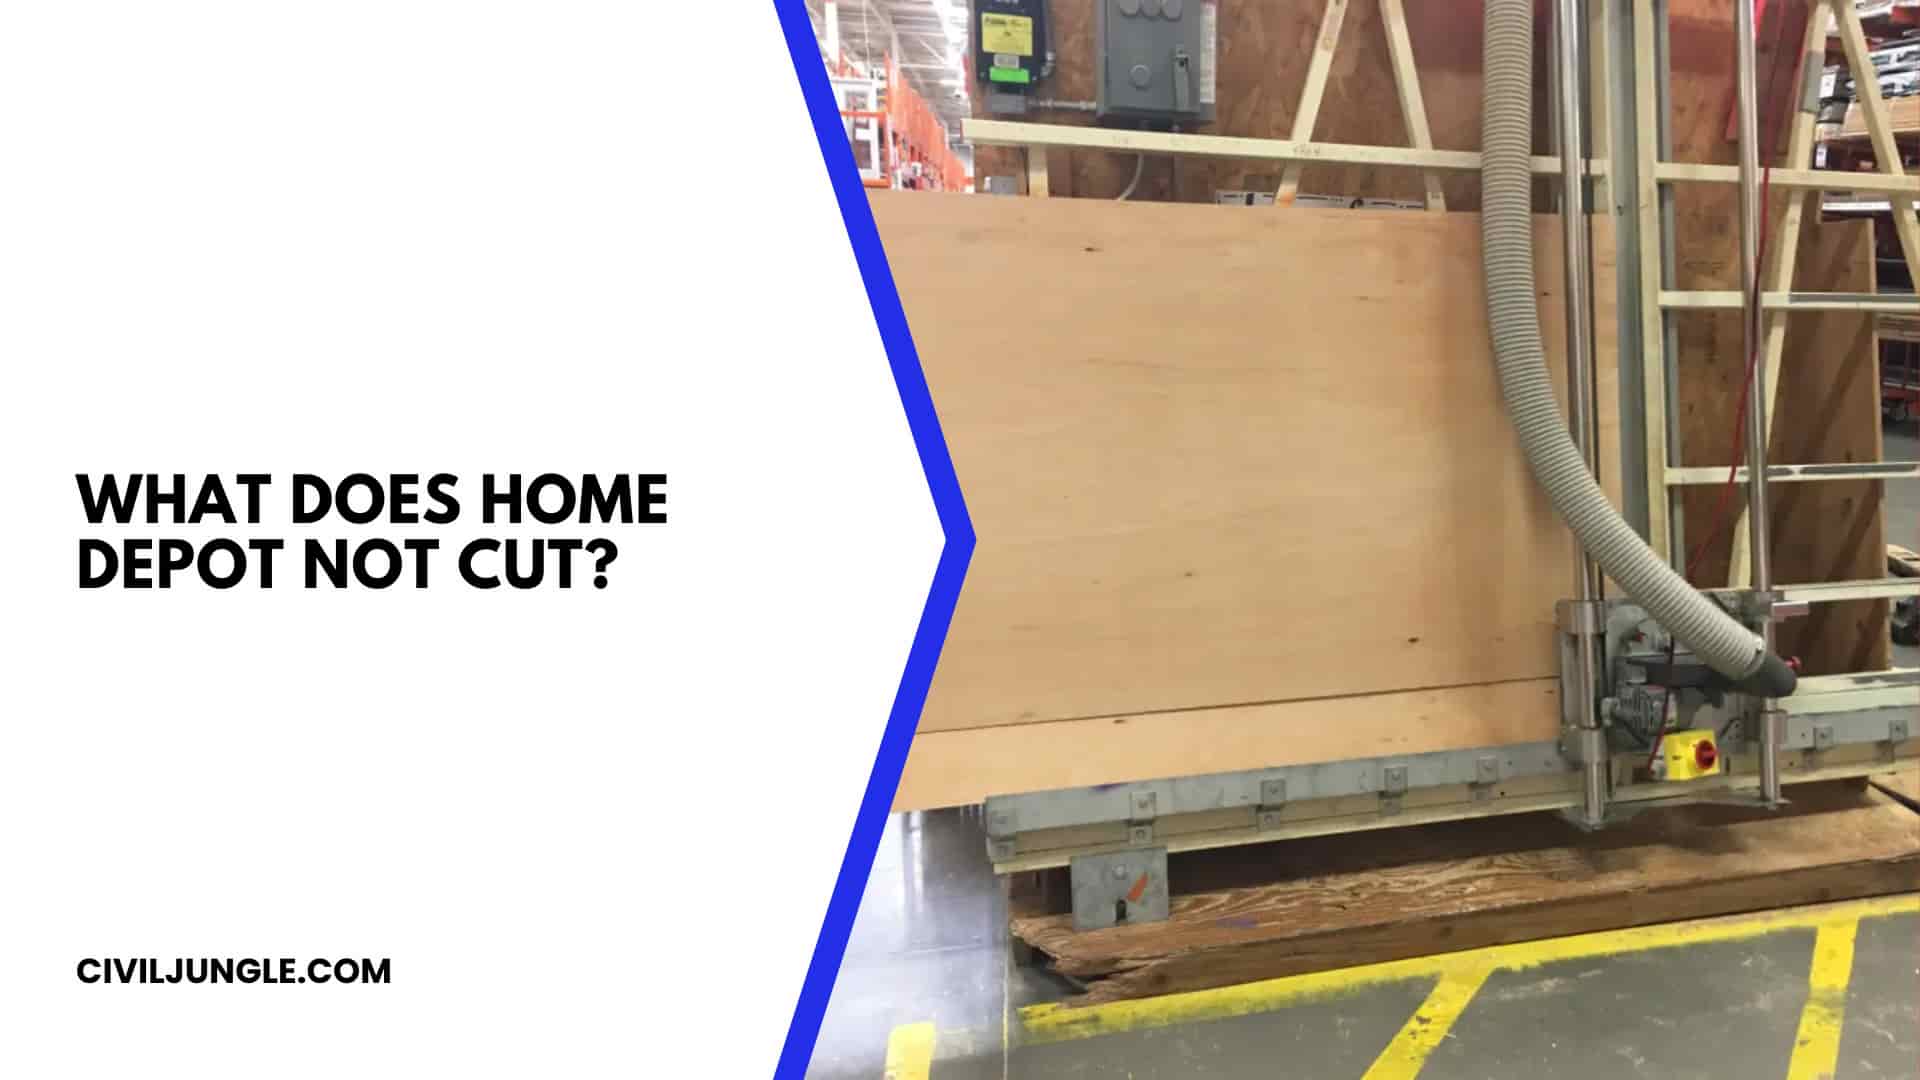 What Does Home Depot Not Cut?